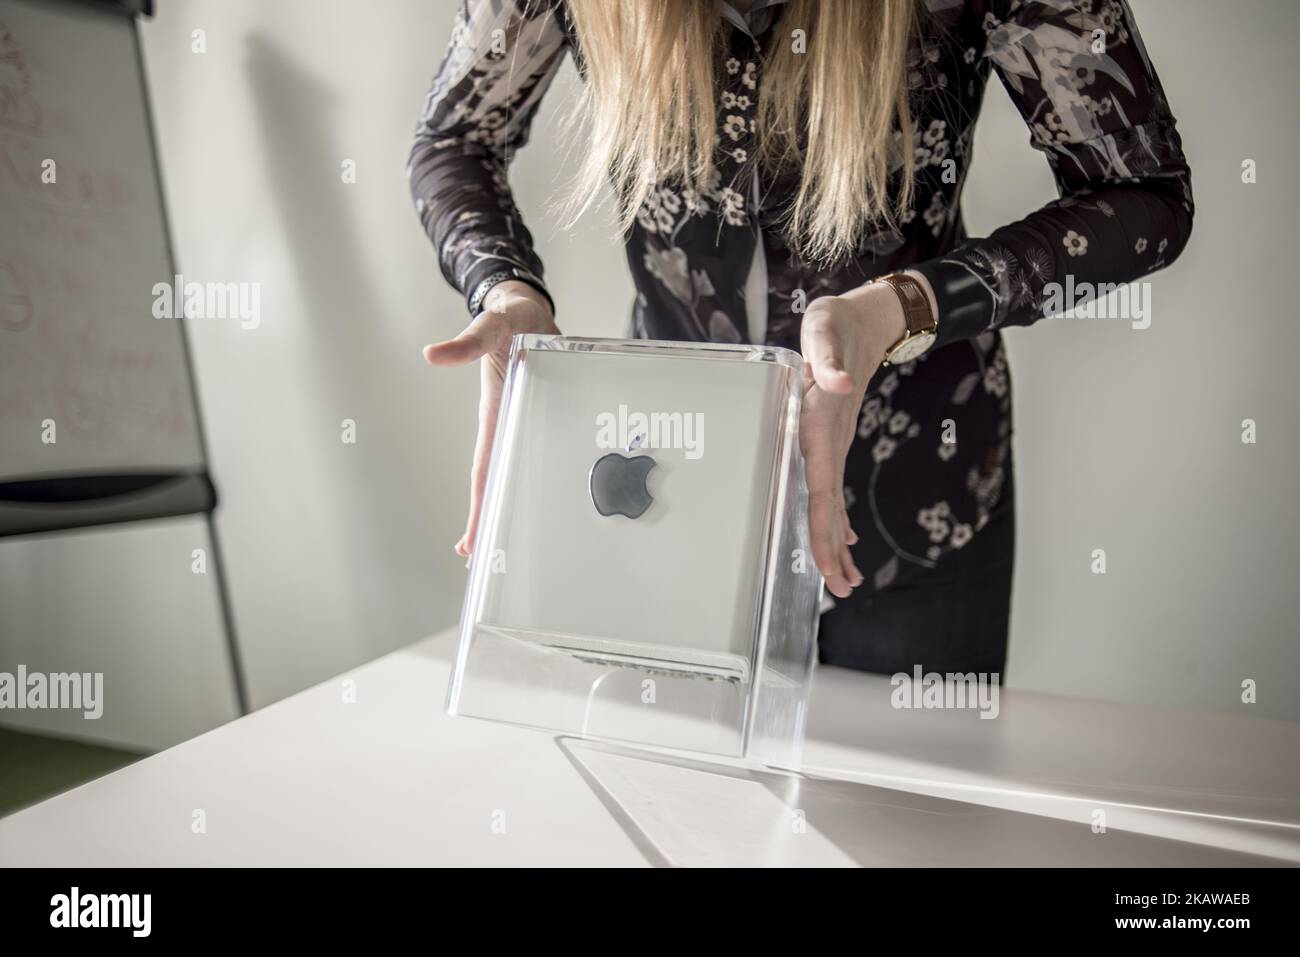 A member of staff shows Power Mac G4 Cube, release date July 2000, at MacPaw's Ukrainian Apple Museum in Kiev, Ukraine on January 26, 2017. Ukrainian developer MacPaw has opened Apple hardware museum at the company’s office in Kiev. The collection has more than 70 original Macintosh models dated from 1981 to 2017. (Photo by Oleksandr Rupeta/NurPhoto) Stock Photo